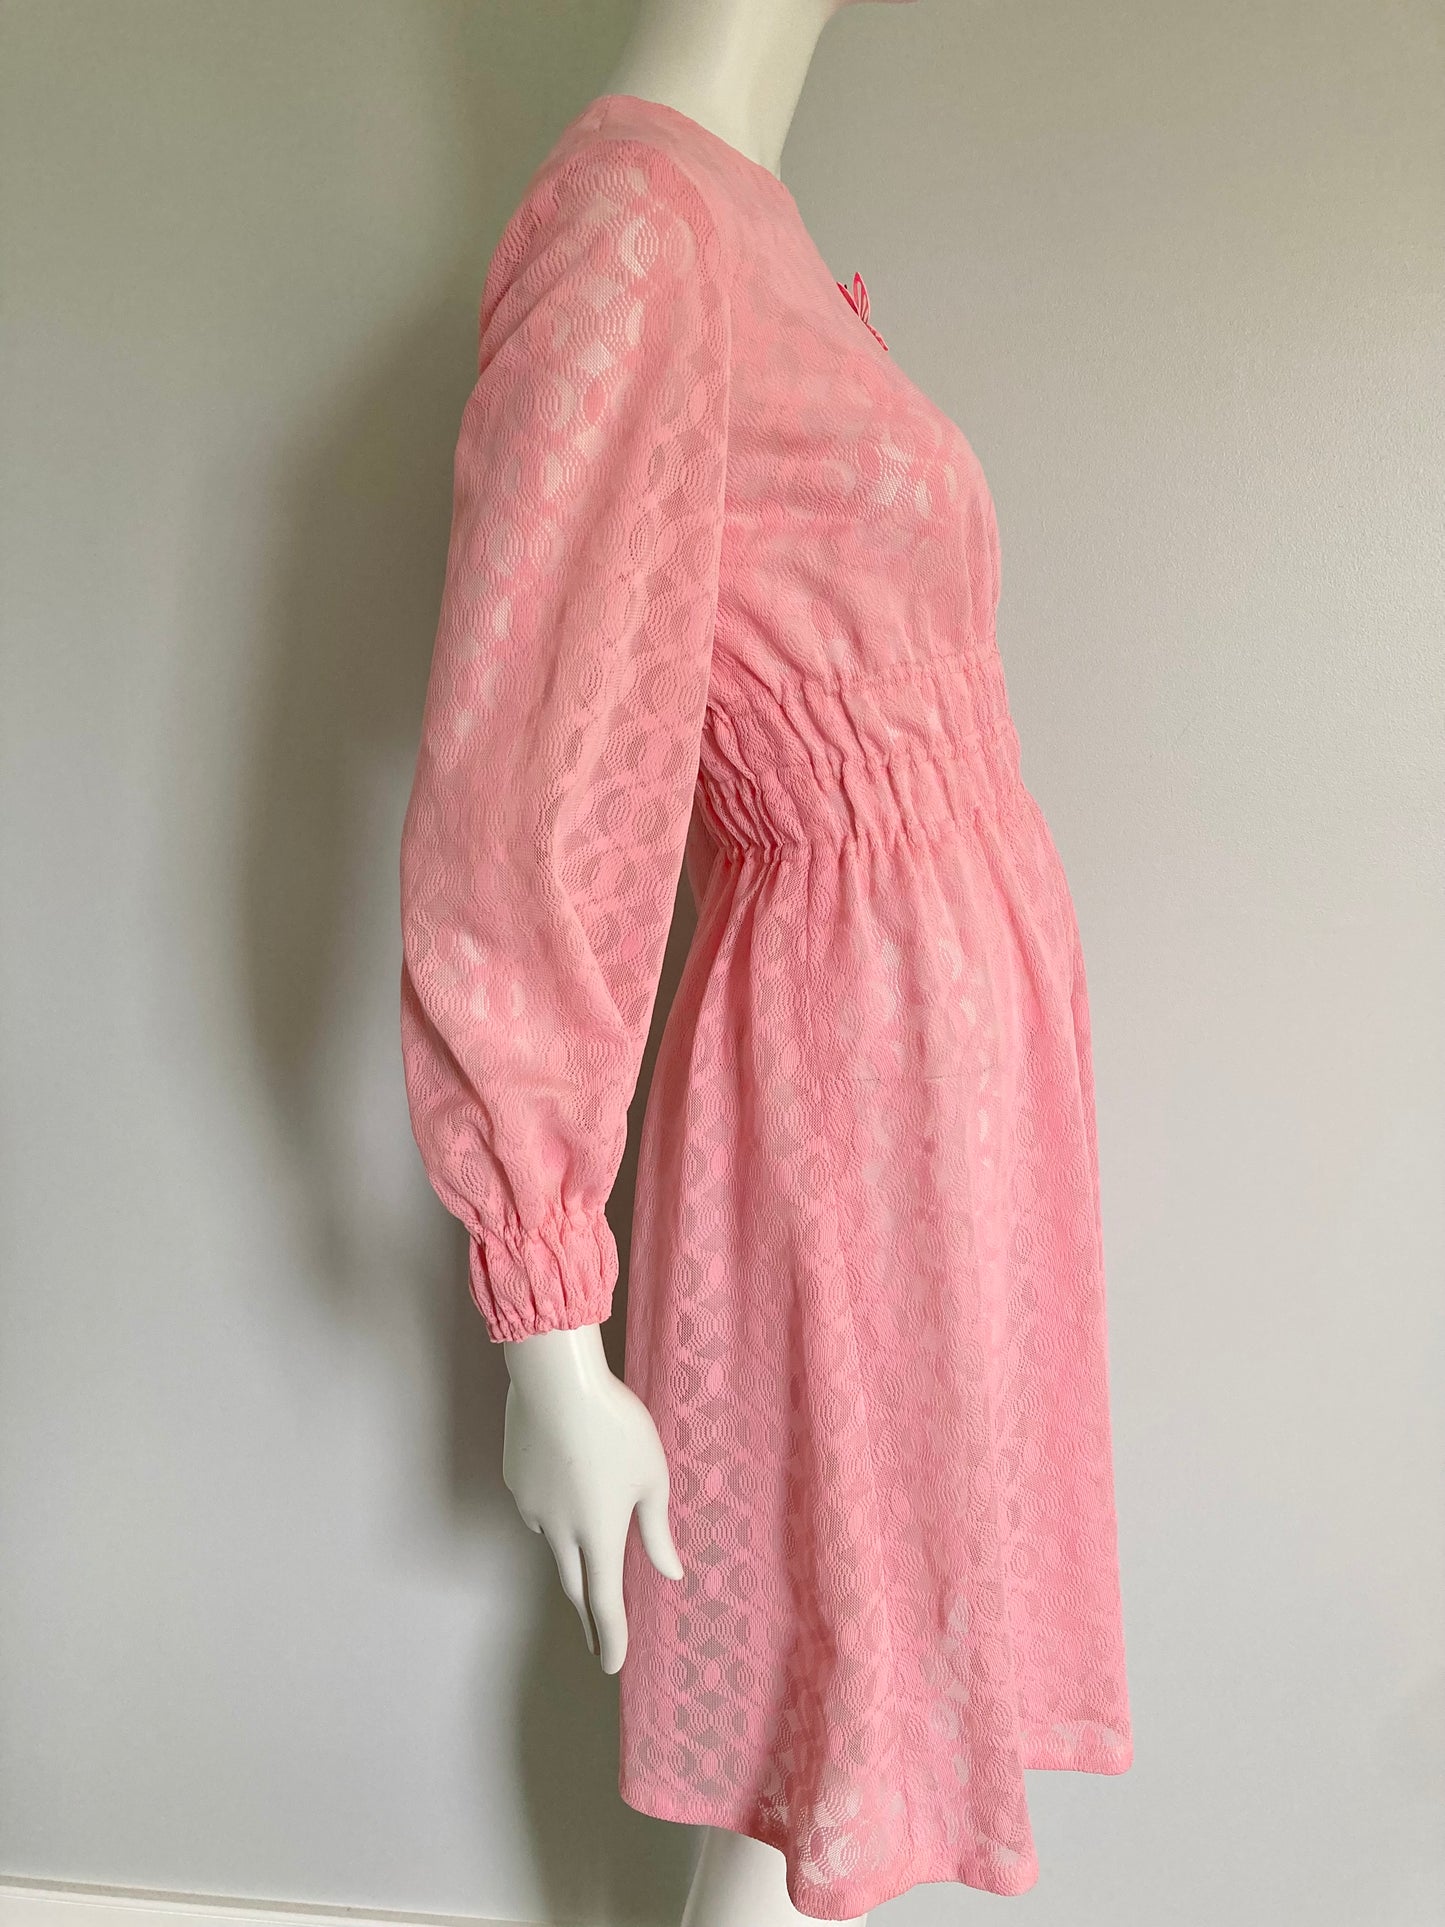 1970s Pink Lace Dress with Gathered Waist and Cuffs, Size S/M